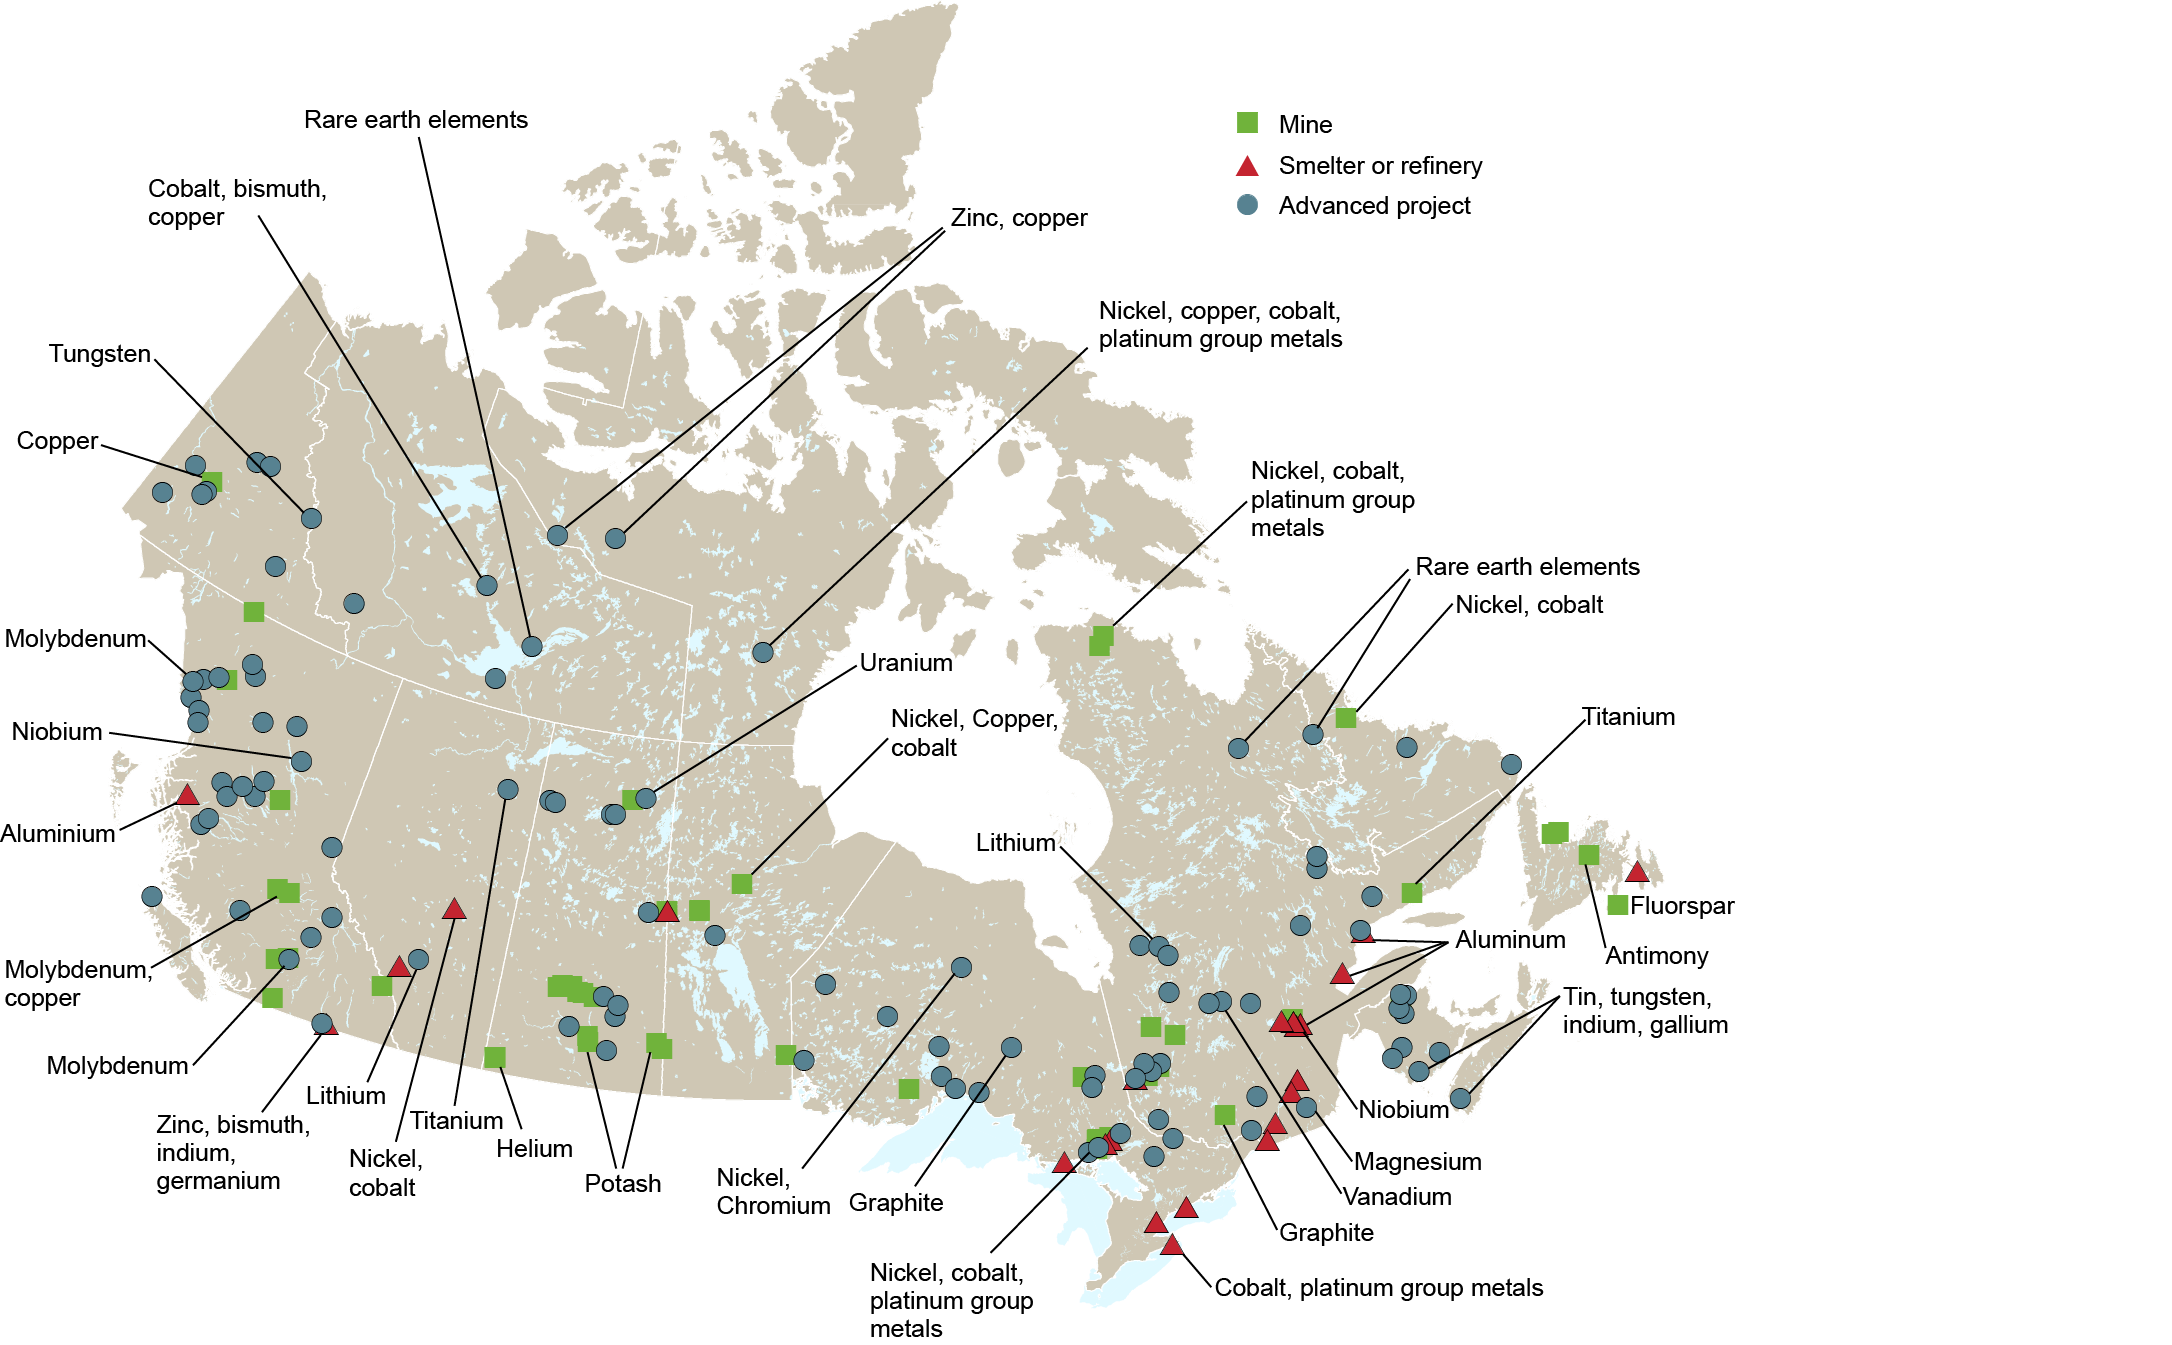 Canadian critical minerals and sample uses